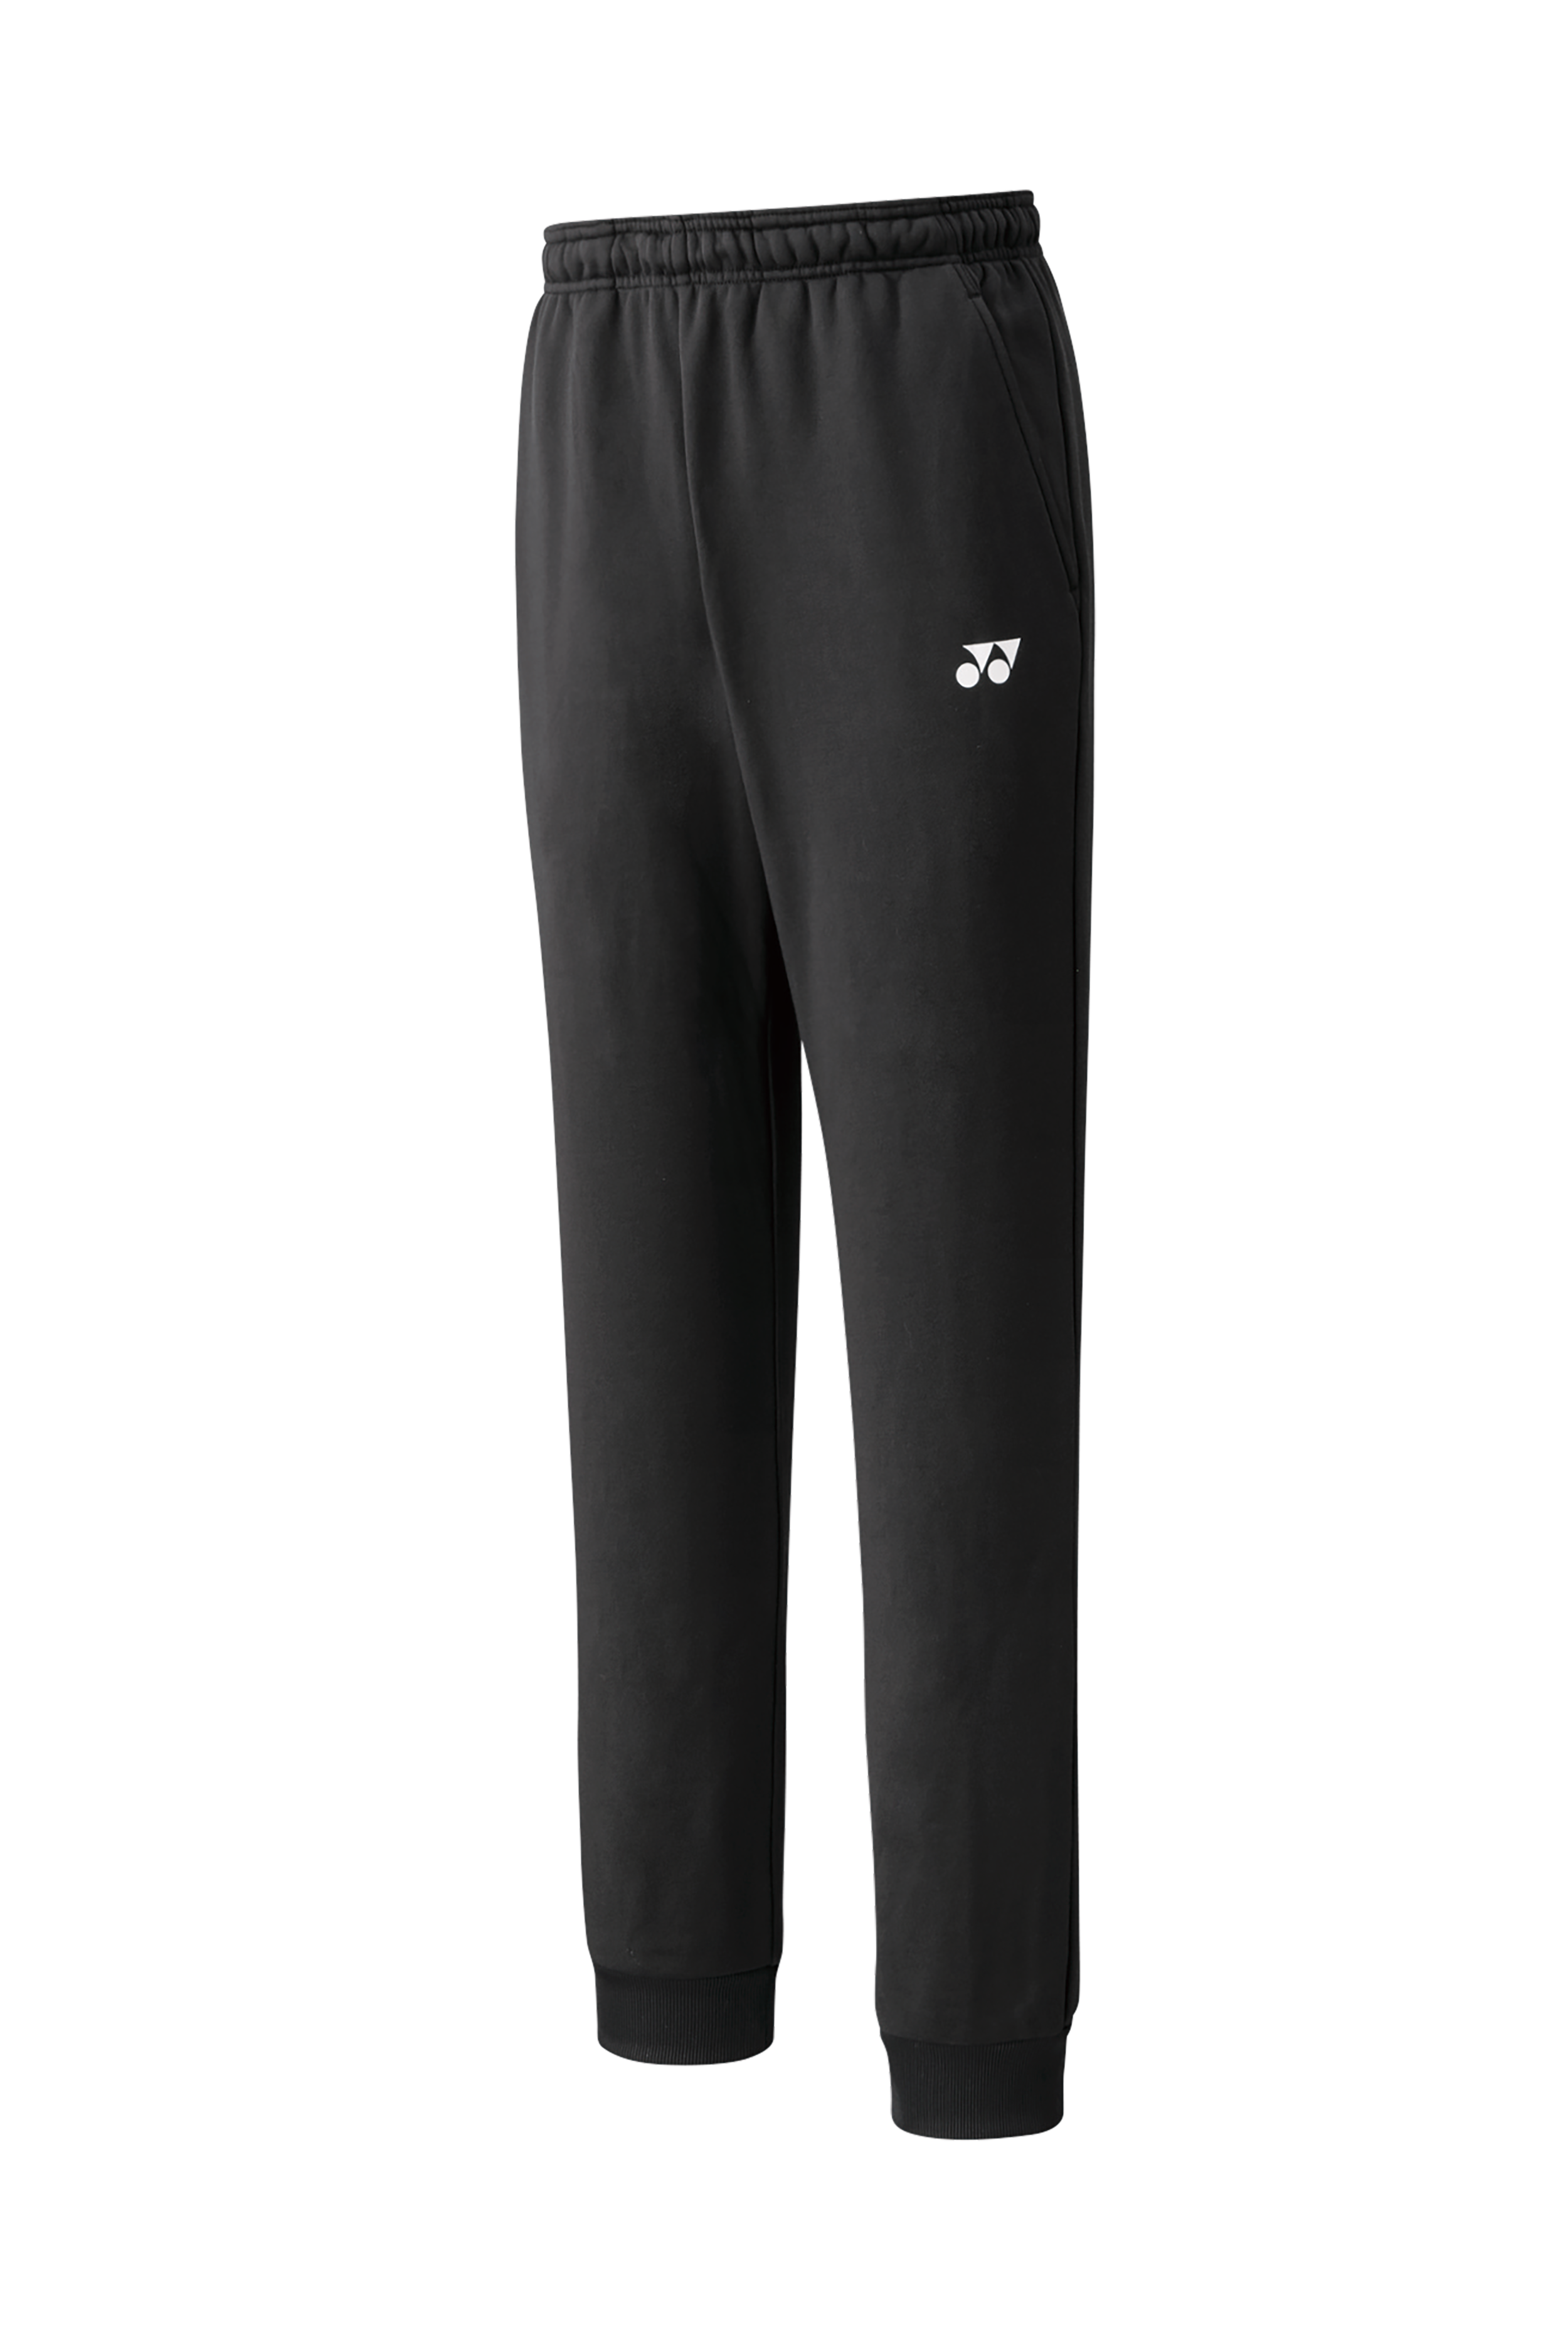 Polyester Black&Blue YONEX Men Tracksuit Winter Collection at Rs 1999/piece  in Delhi